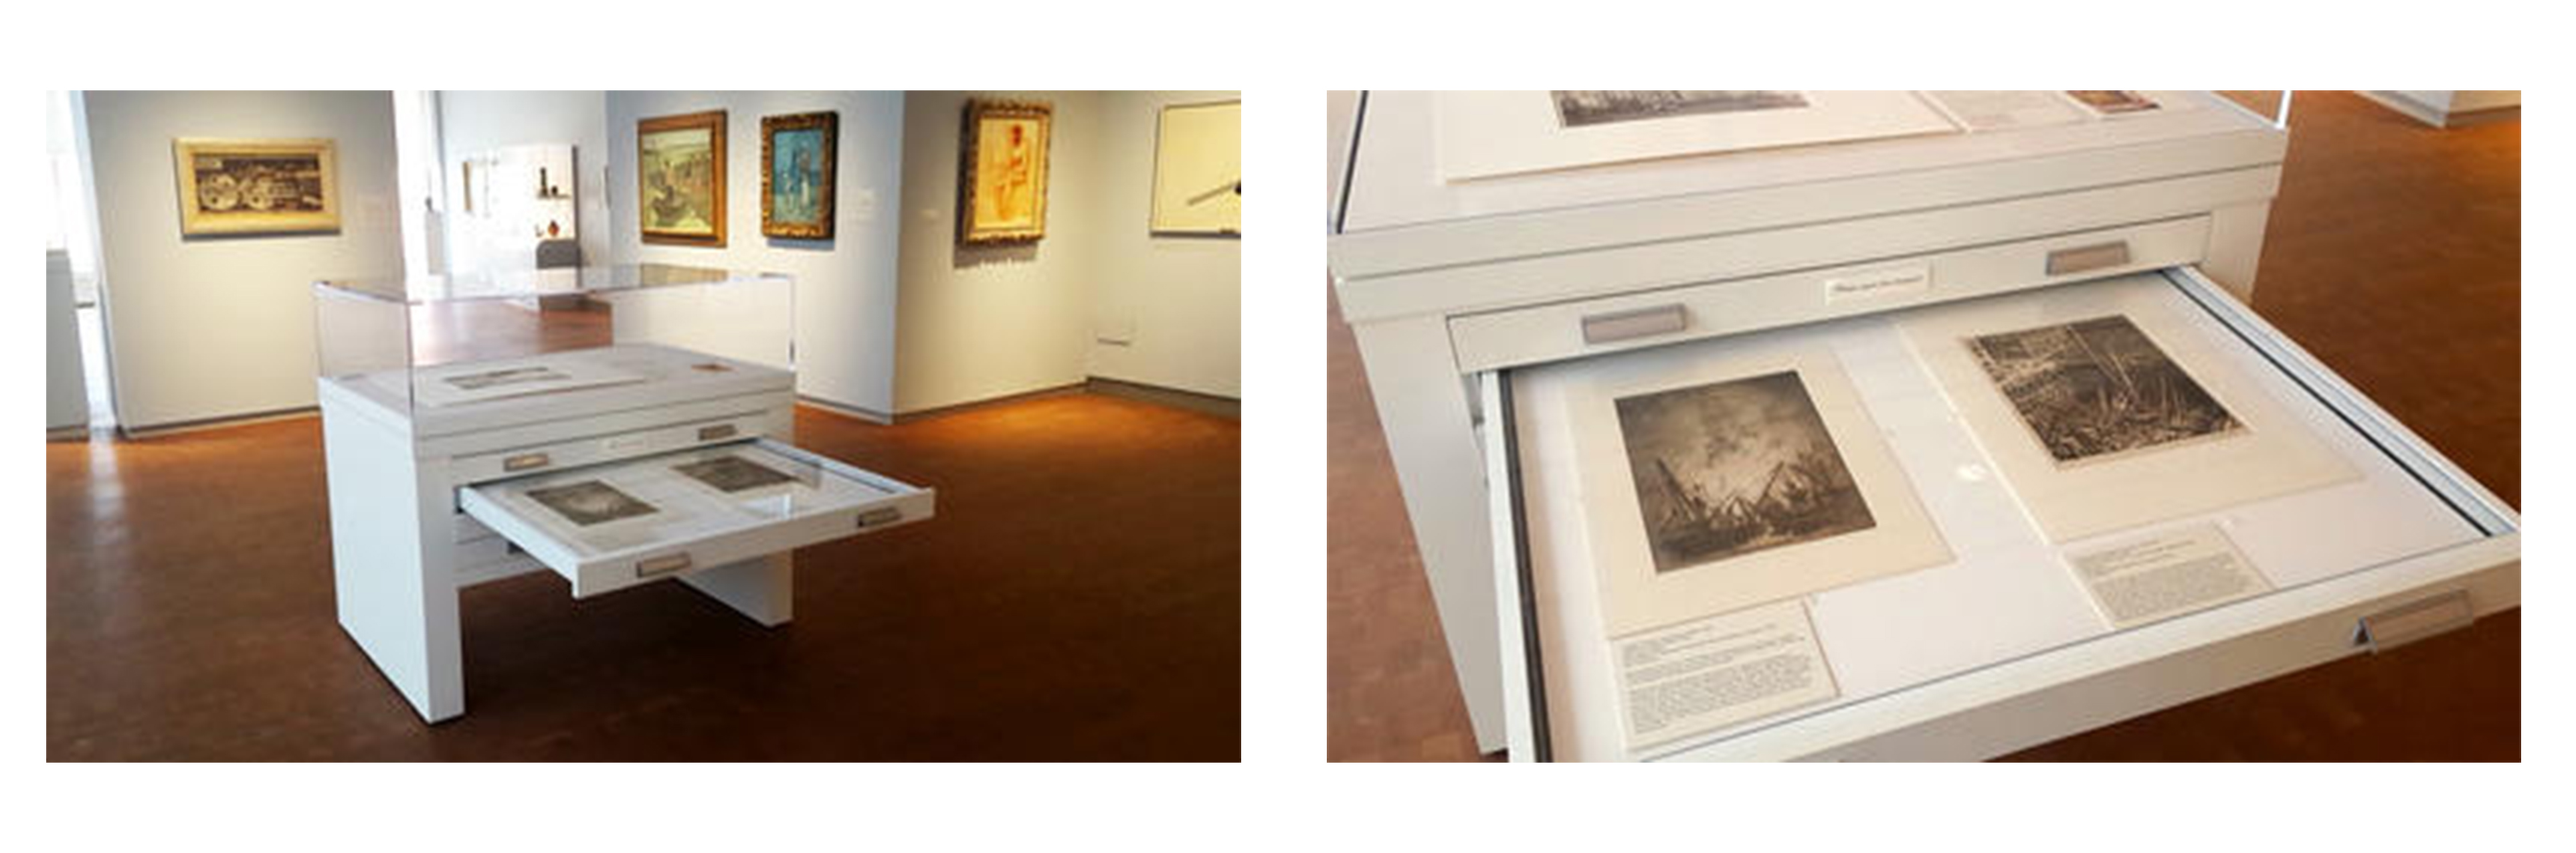 left: a white display cabinet in the center of an art gallery, with one drawer pulled out. right: a close-up of two prints laid out on the pulled-out drawer of the display cabinet.